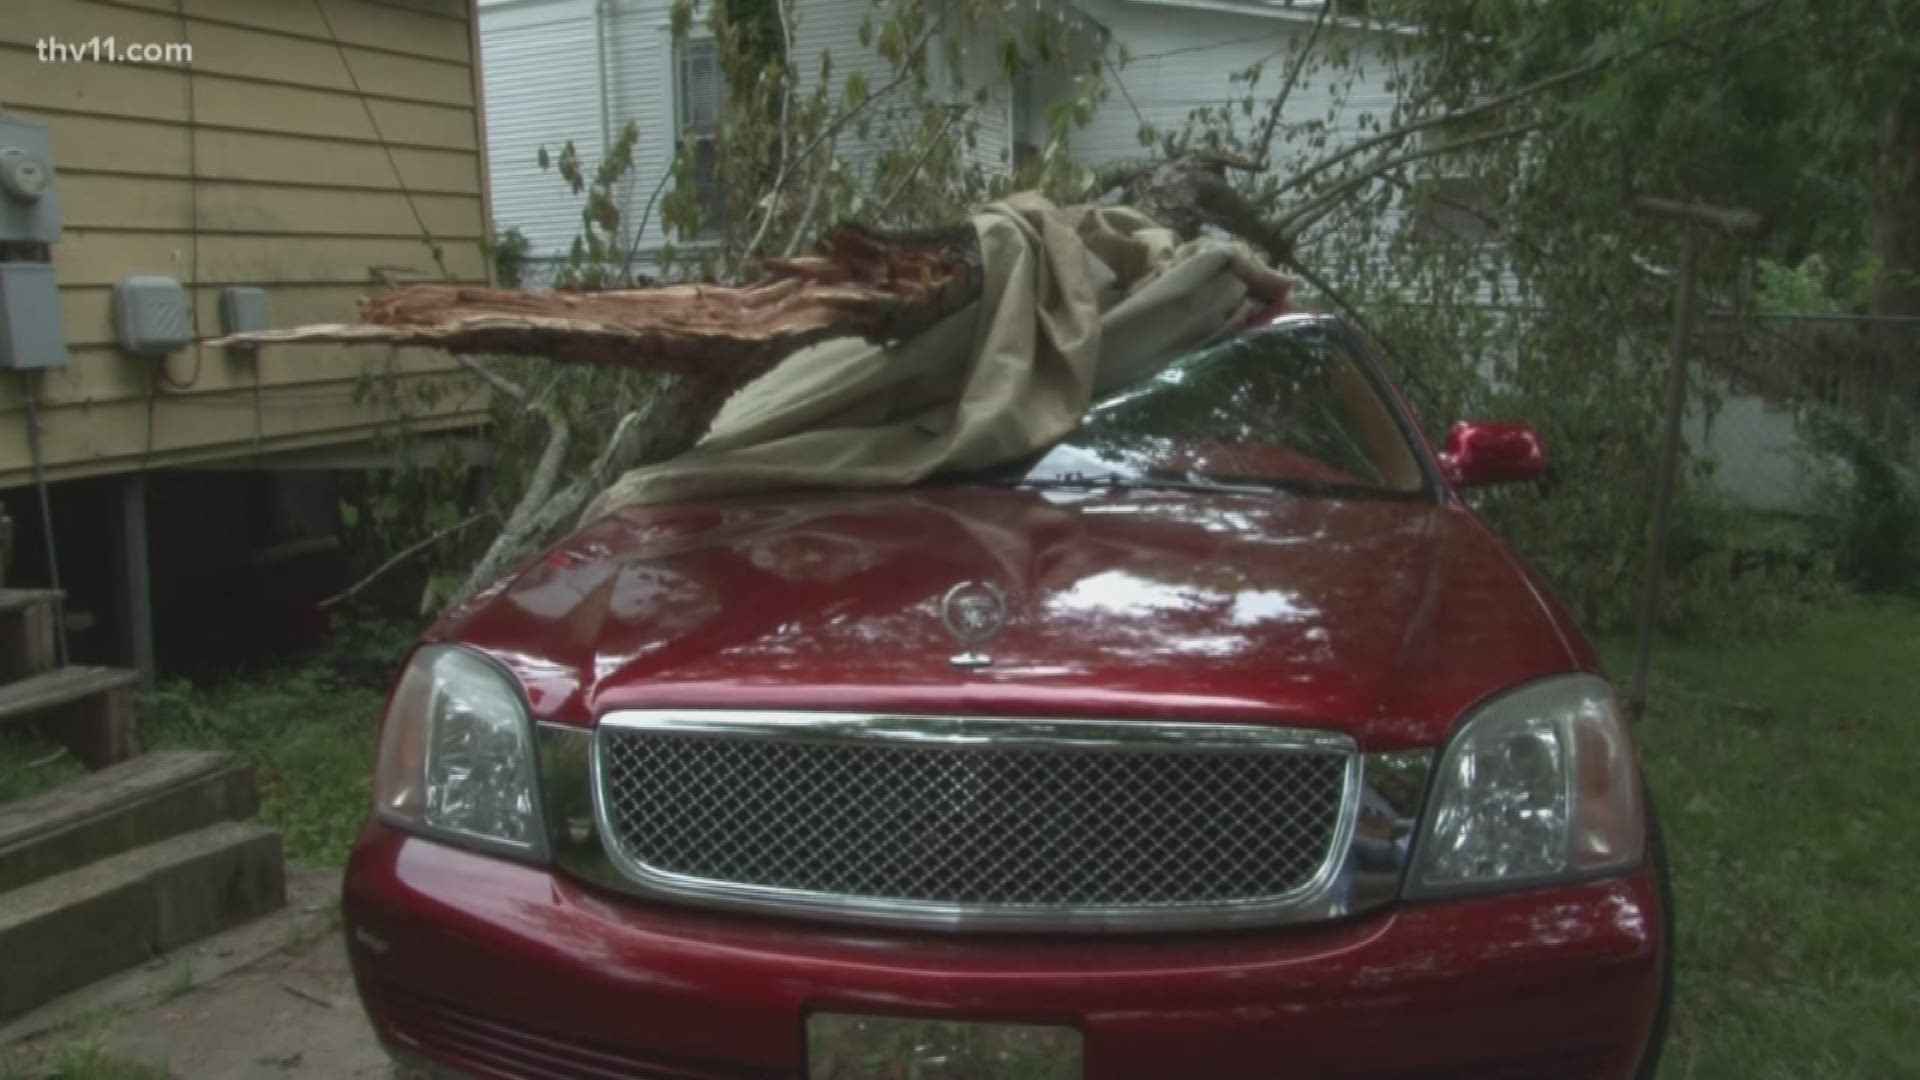 On Wednesday night Marvin Marshall pulled into his driveway around 10:00 and saw that his tree in his backyard had blown over.